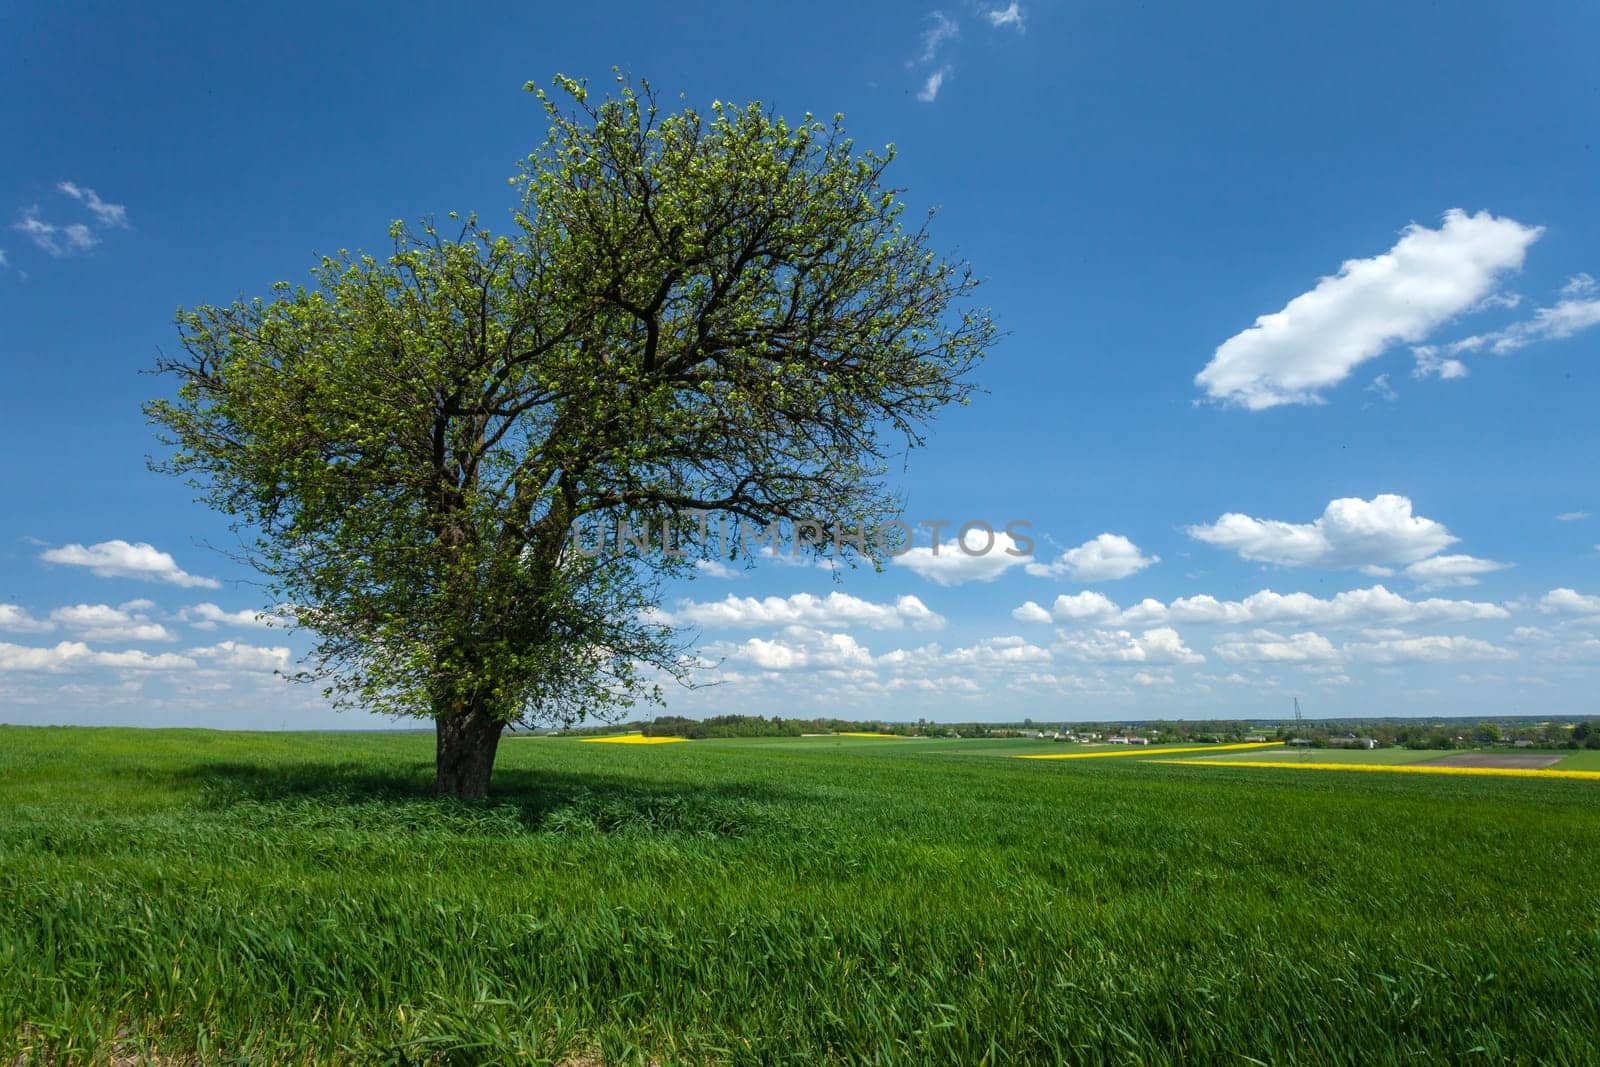 A large tree growing in a green field, view on a spring sunny day by darekb22